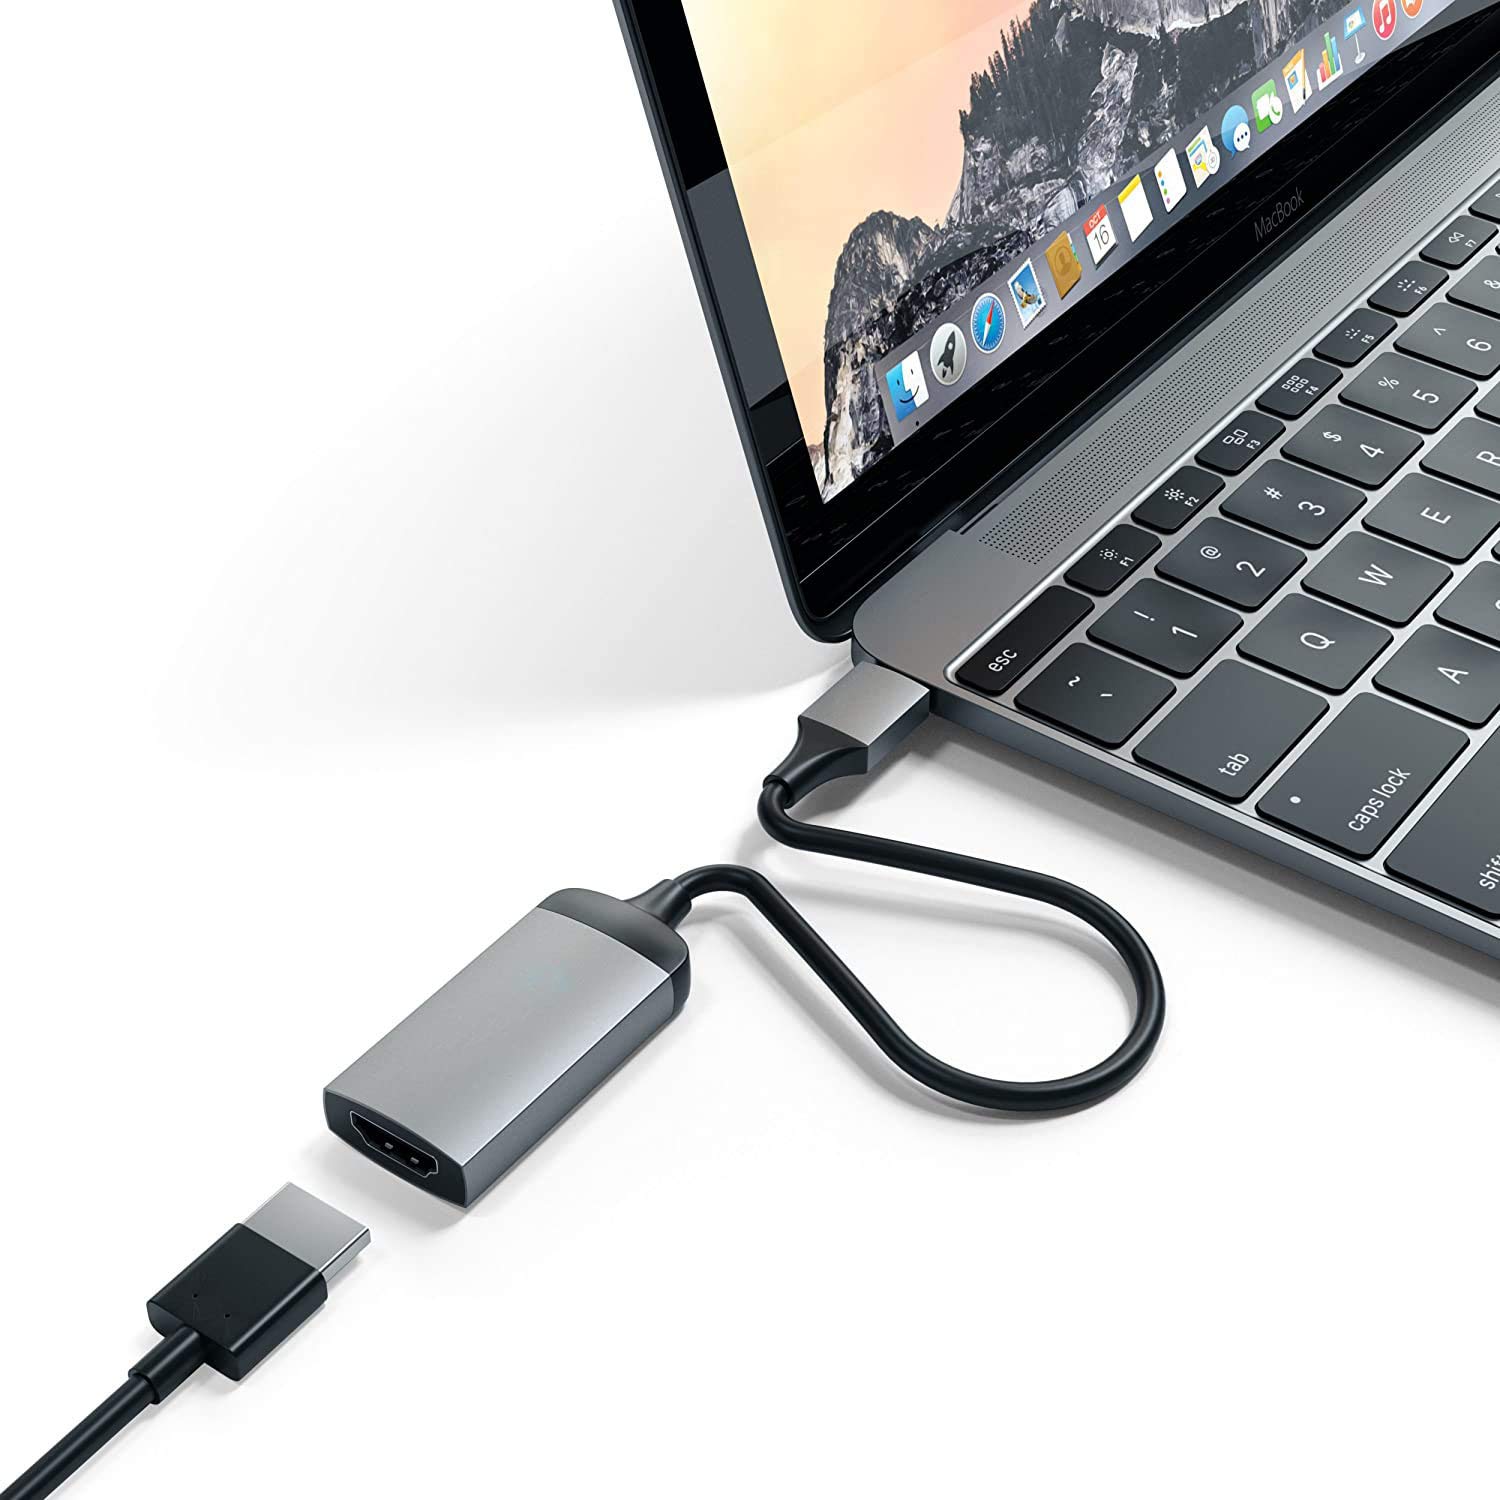 uni USB Type-C to HDMI Cable 4K@60Hz USB C to HDMI Cable Samsung S10 Surface Book 2 3ft and More-Grey MacBook Air/iPad Pro 2019/2018 Thunderbolt 3 Compatible for MacBook Pro 2019/2018/2017 